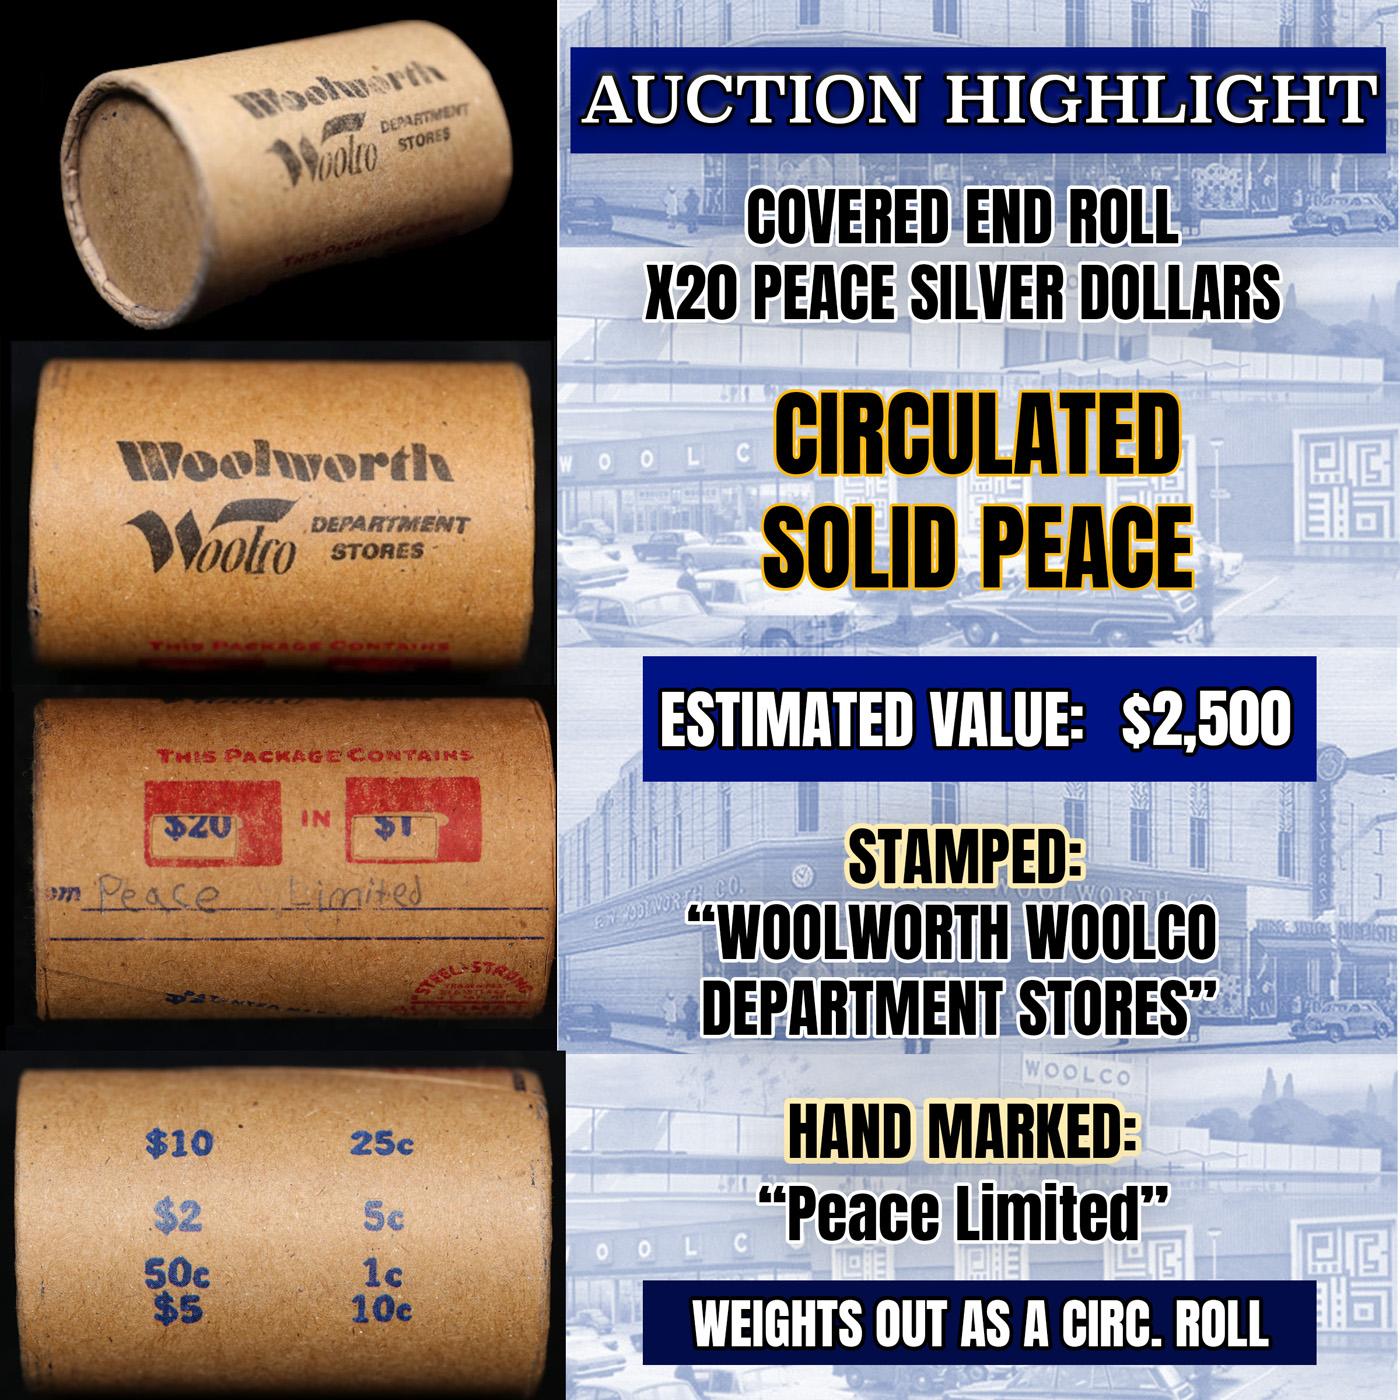 *Uncovered Hoard* - Covered End Roll - Marked "Peace Limited" - Weight shows x20 Coins (FC)